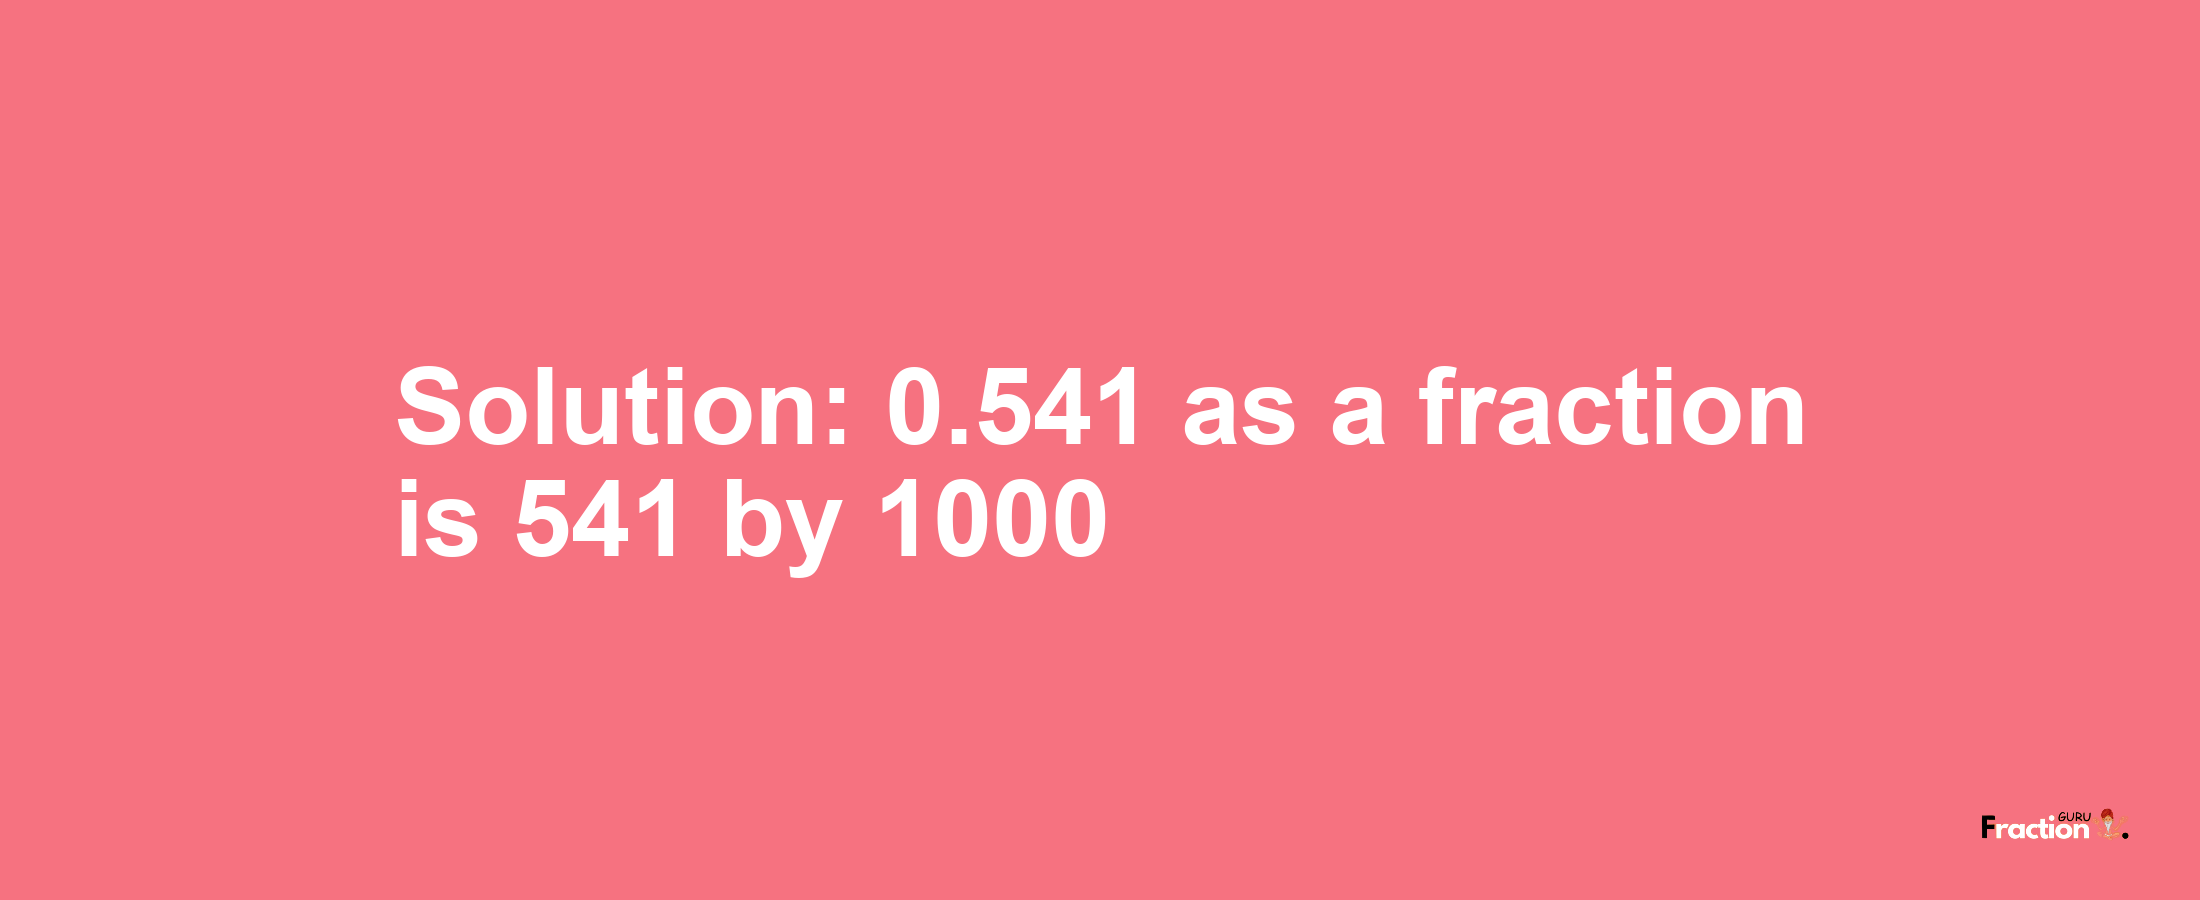 Solution:0.541 as a fraction is 541/1000